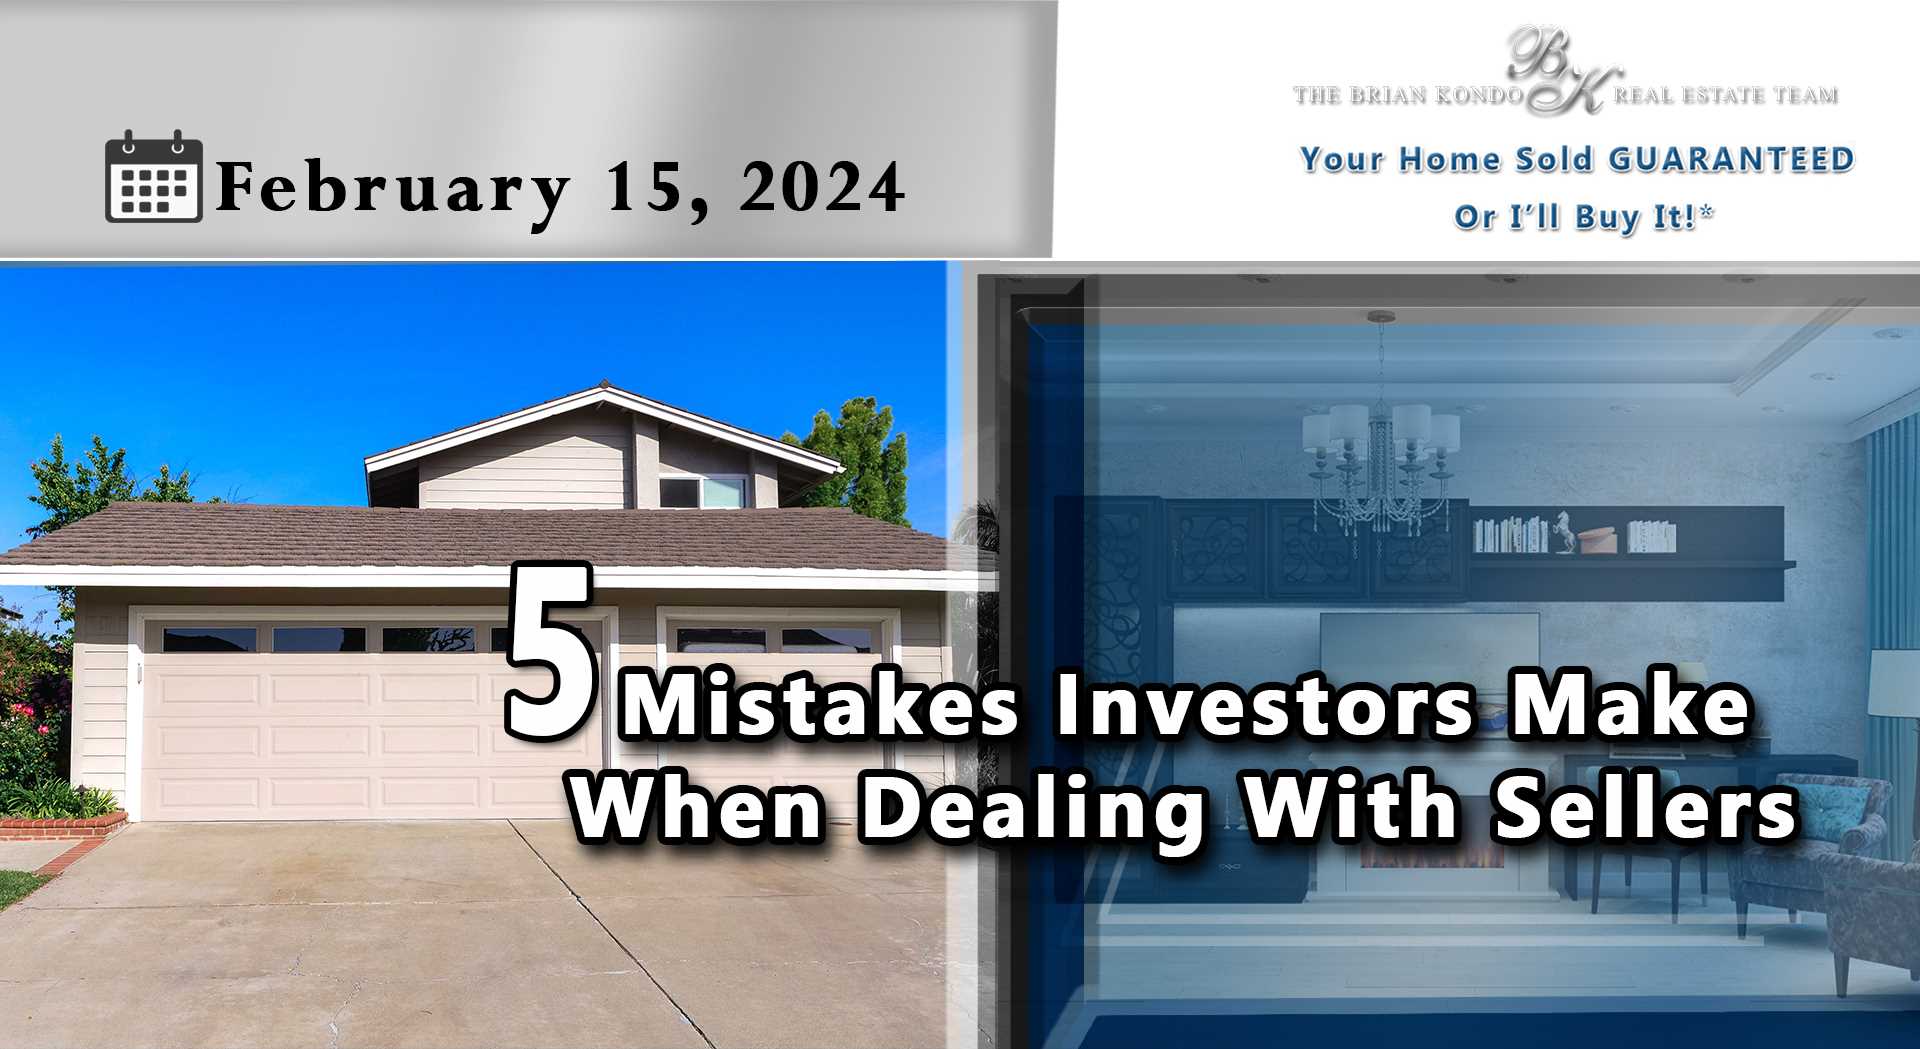 5 MISTAKES INVESTORS MAKE WHEN DEALING WITH SELLERS